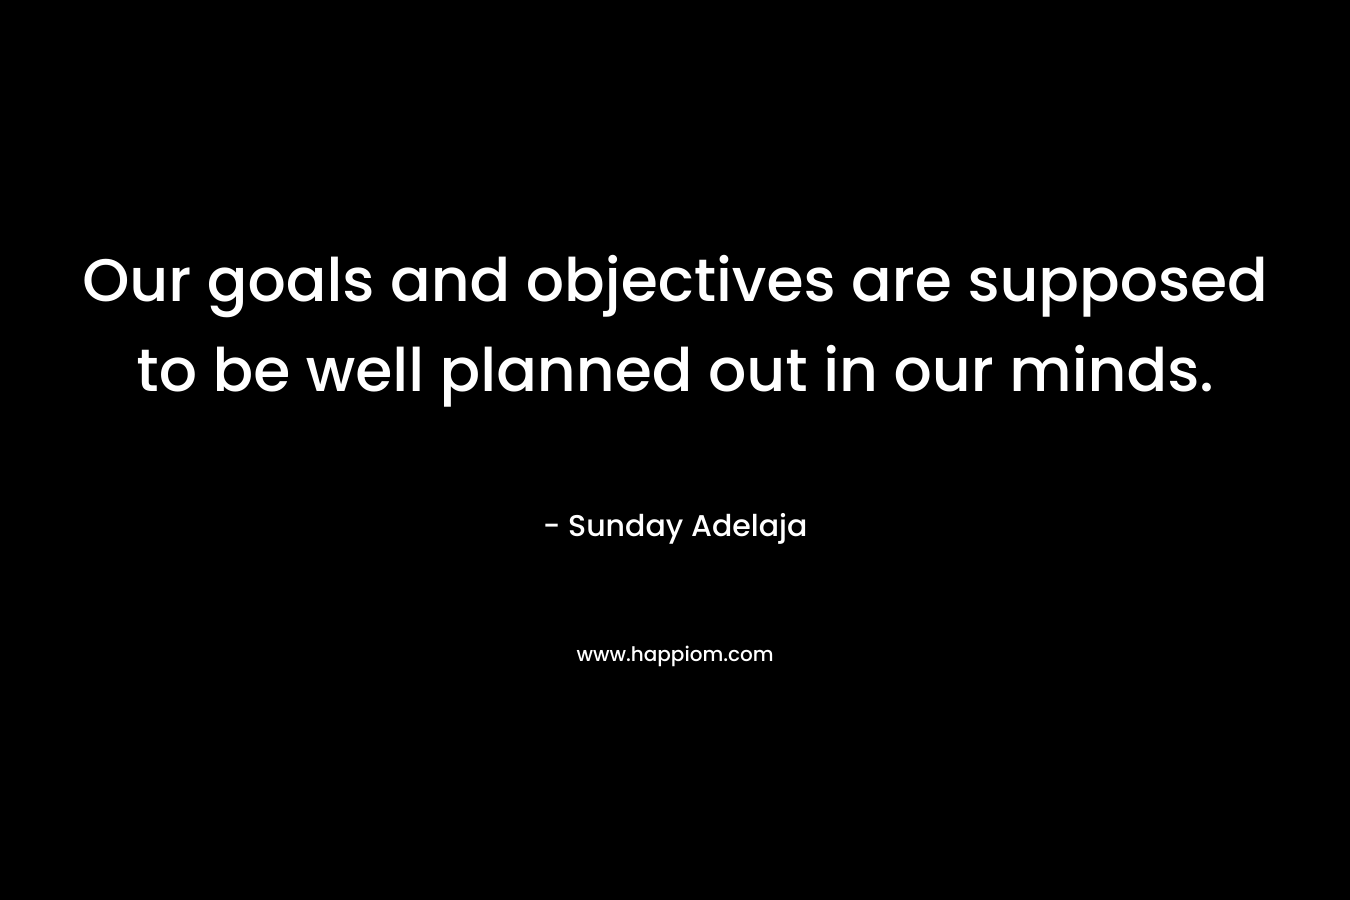 Our goals and objectives are supposed to be well planned out in our minds.